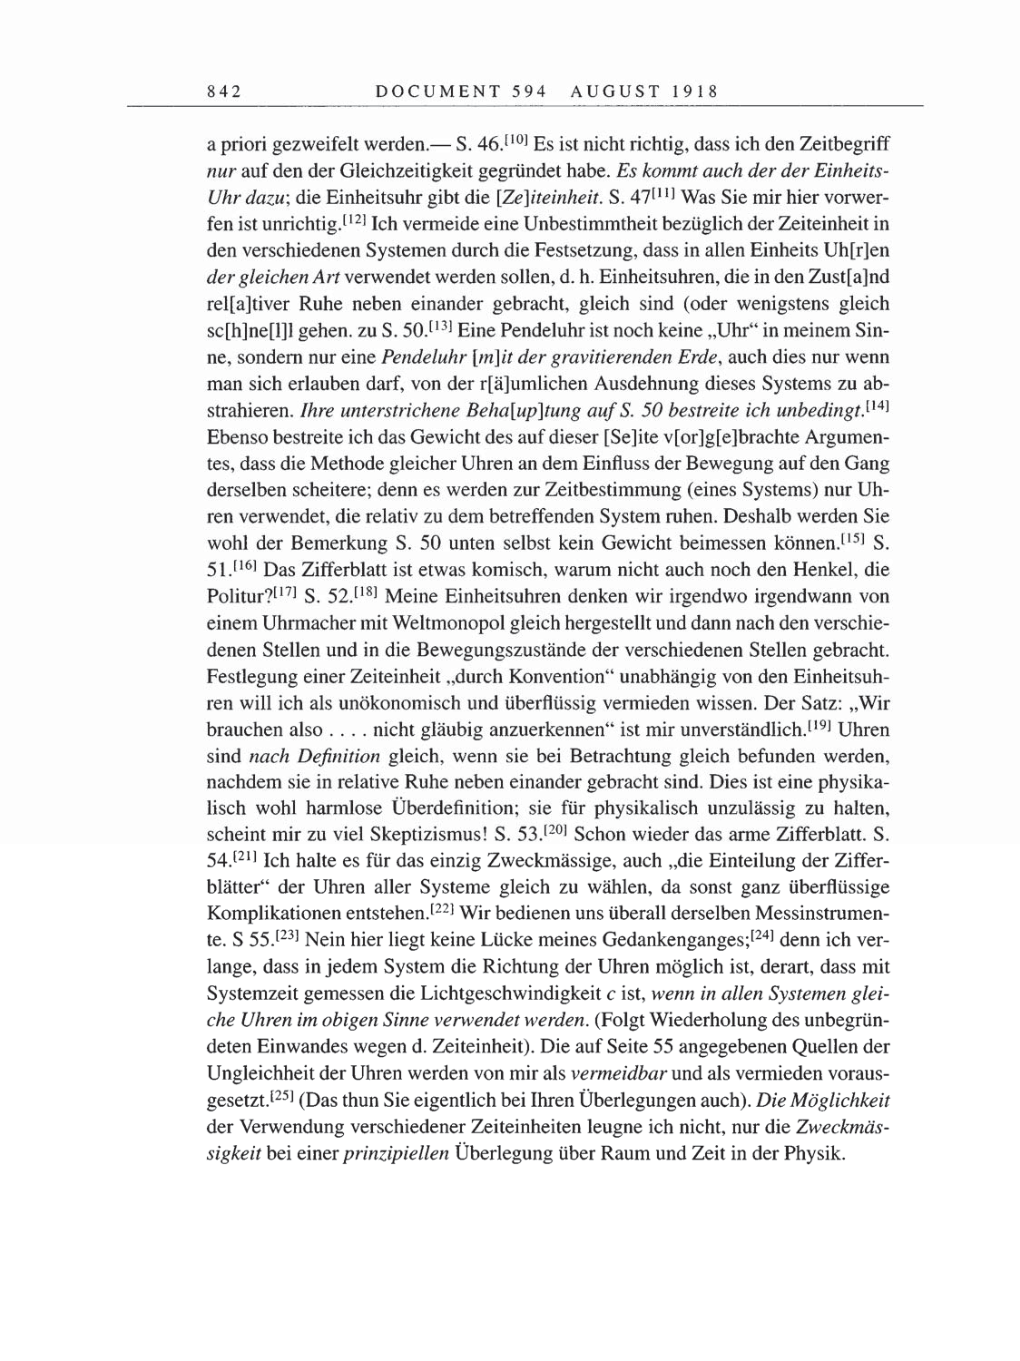 Volume 8, Part B: The Berlin Years: Correspondence 1918 page 842